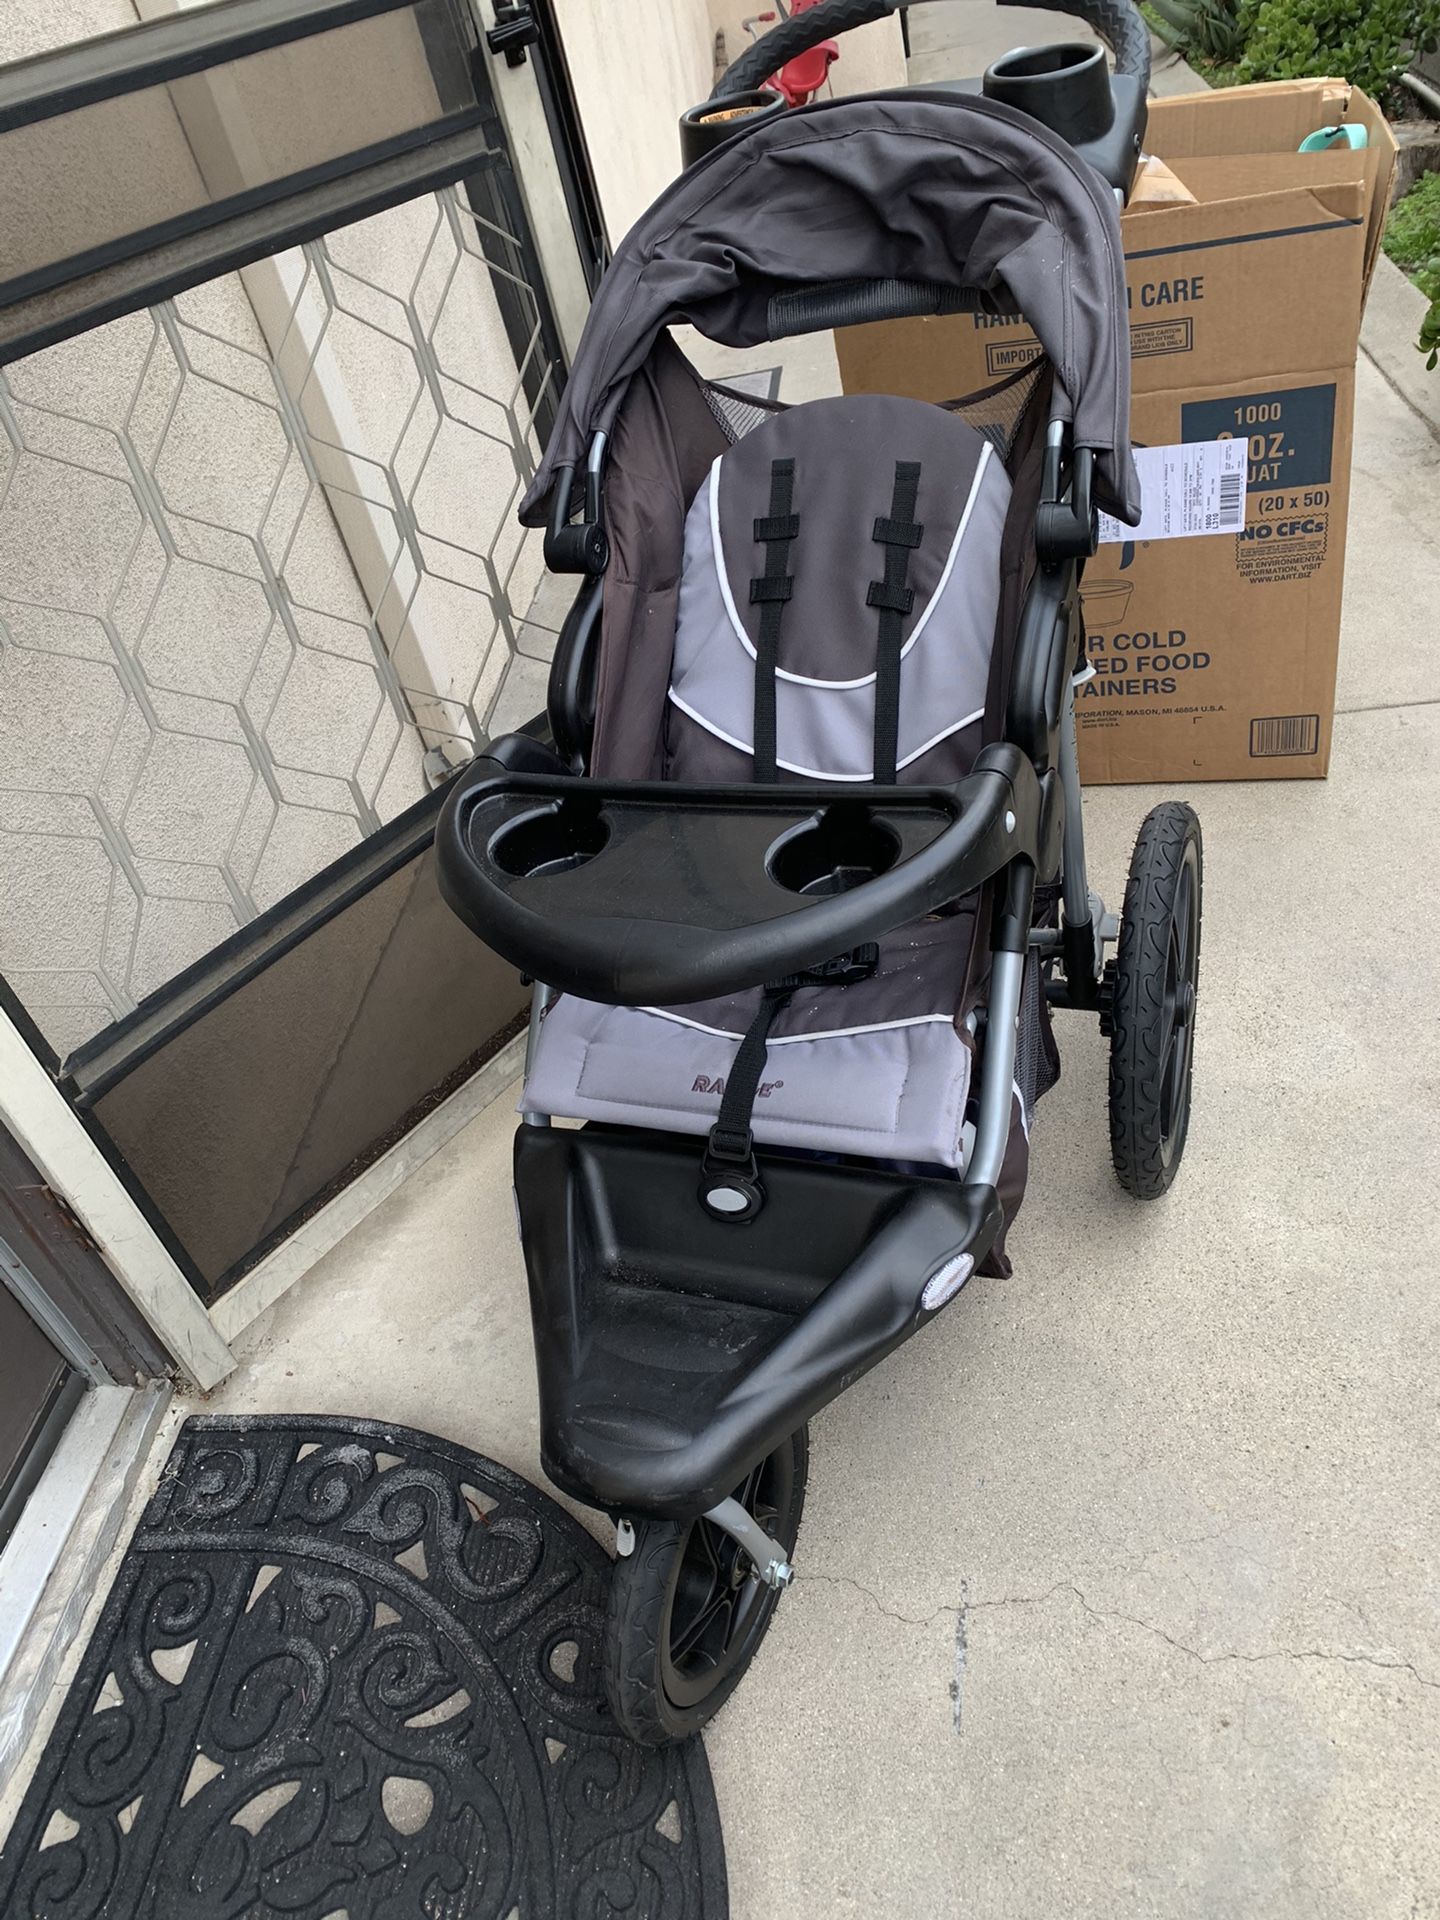 Jogging stroller will give booster seat for free